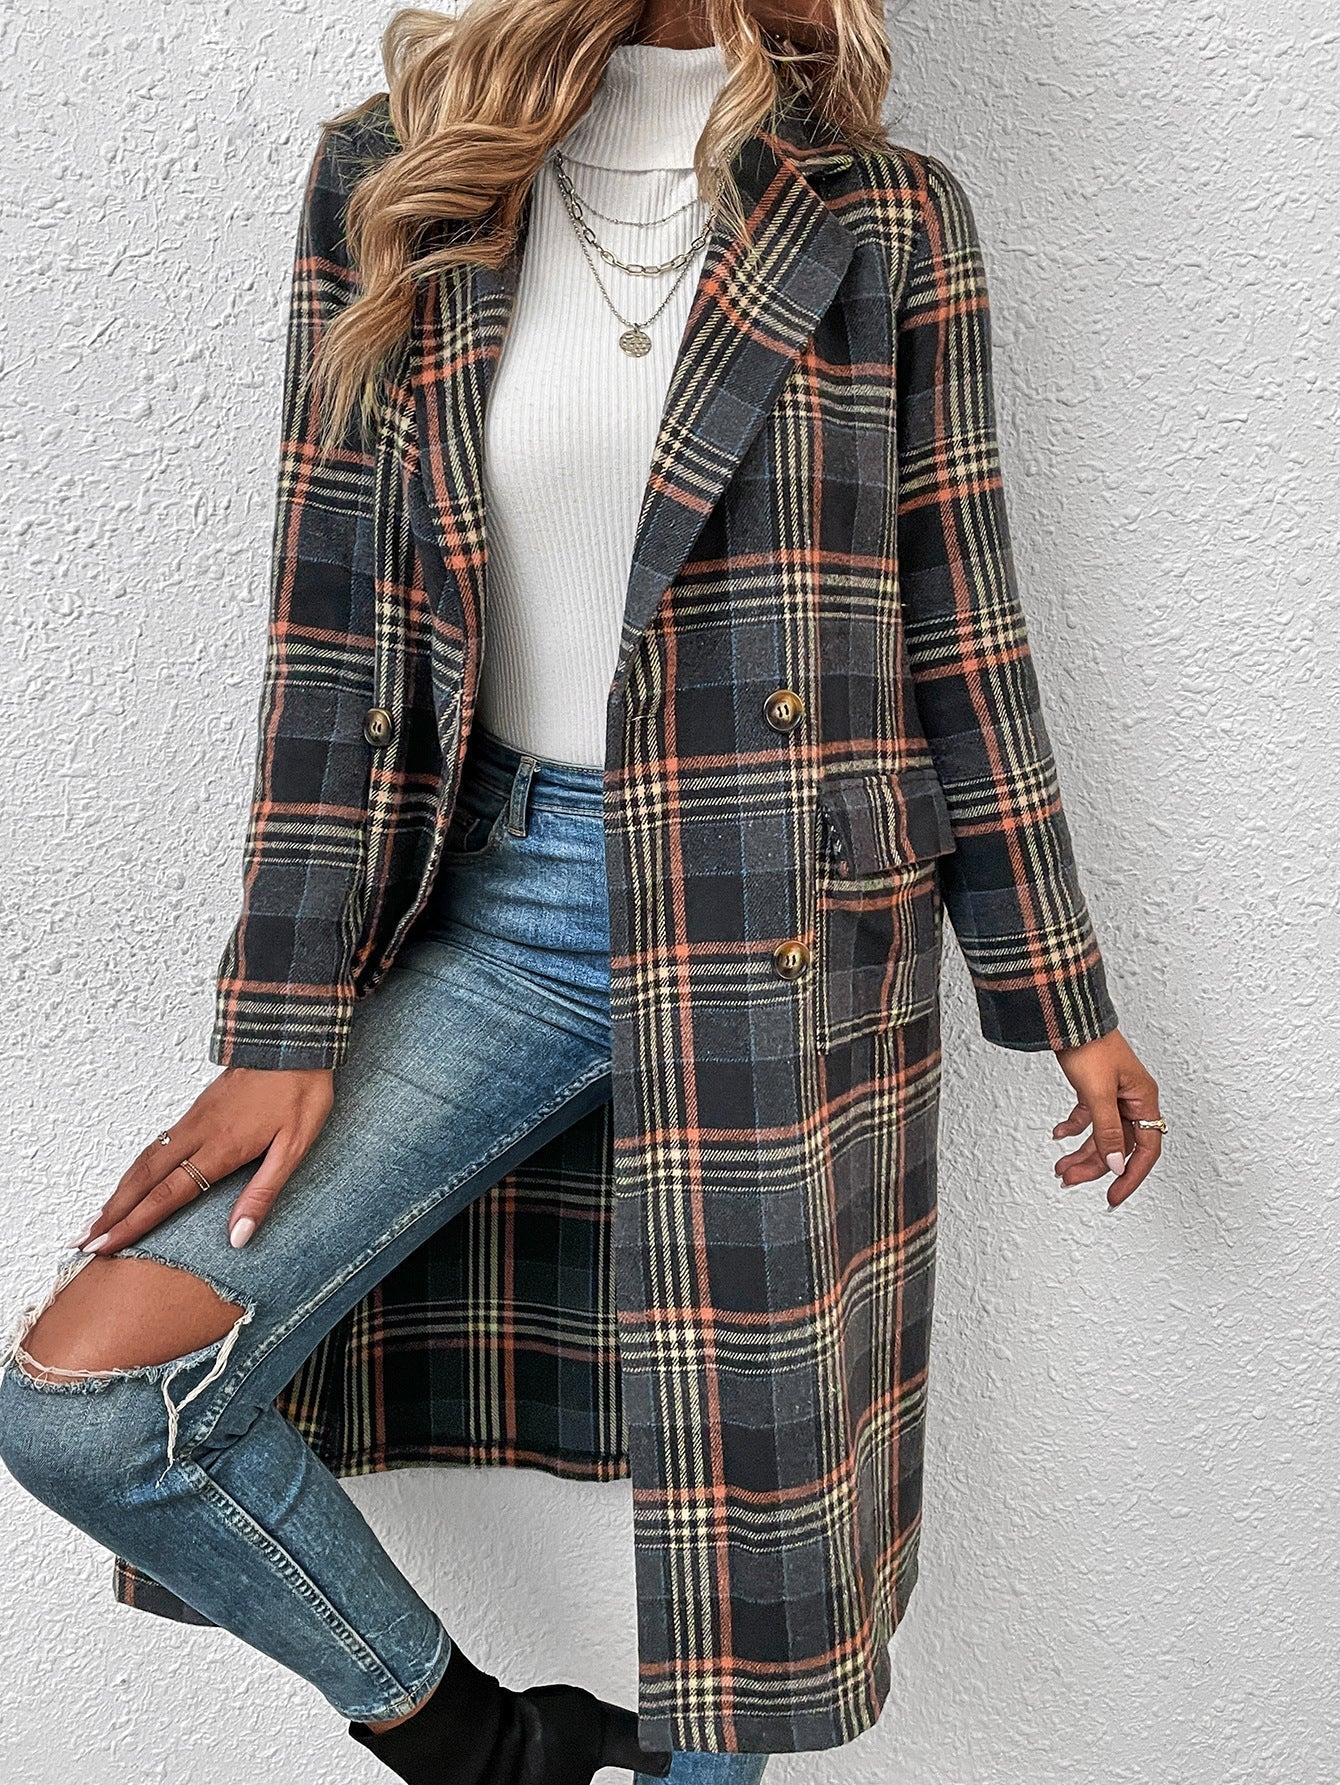 Fall Winter Casual Women Clothing Trendy Single Breasted Plaid Wool Coat